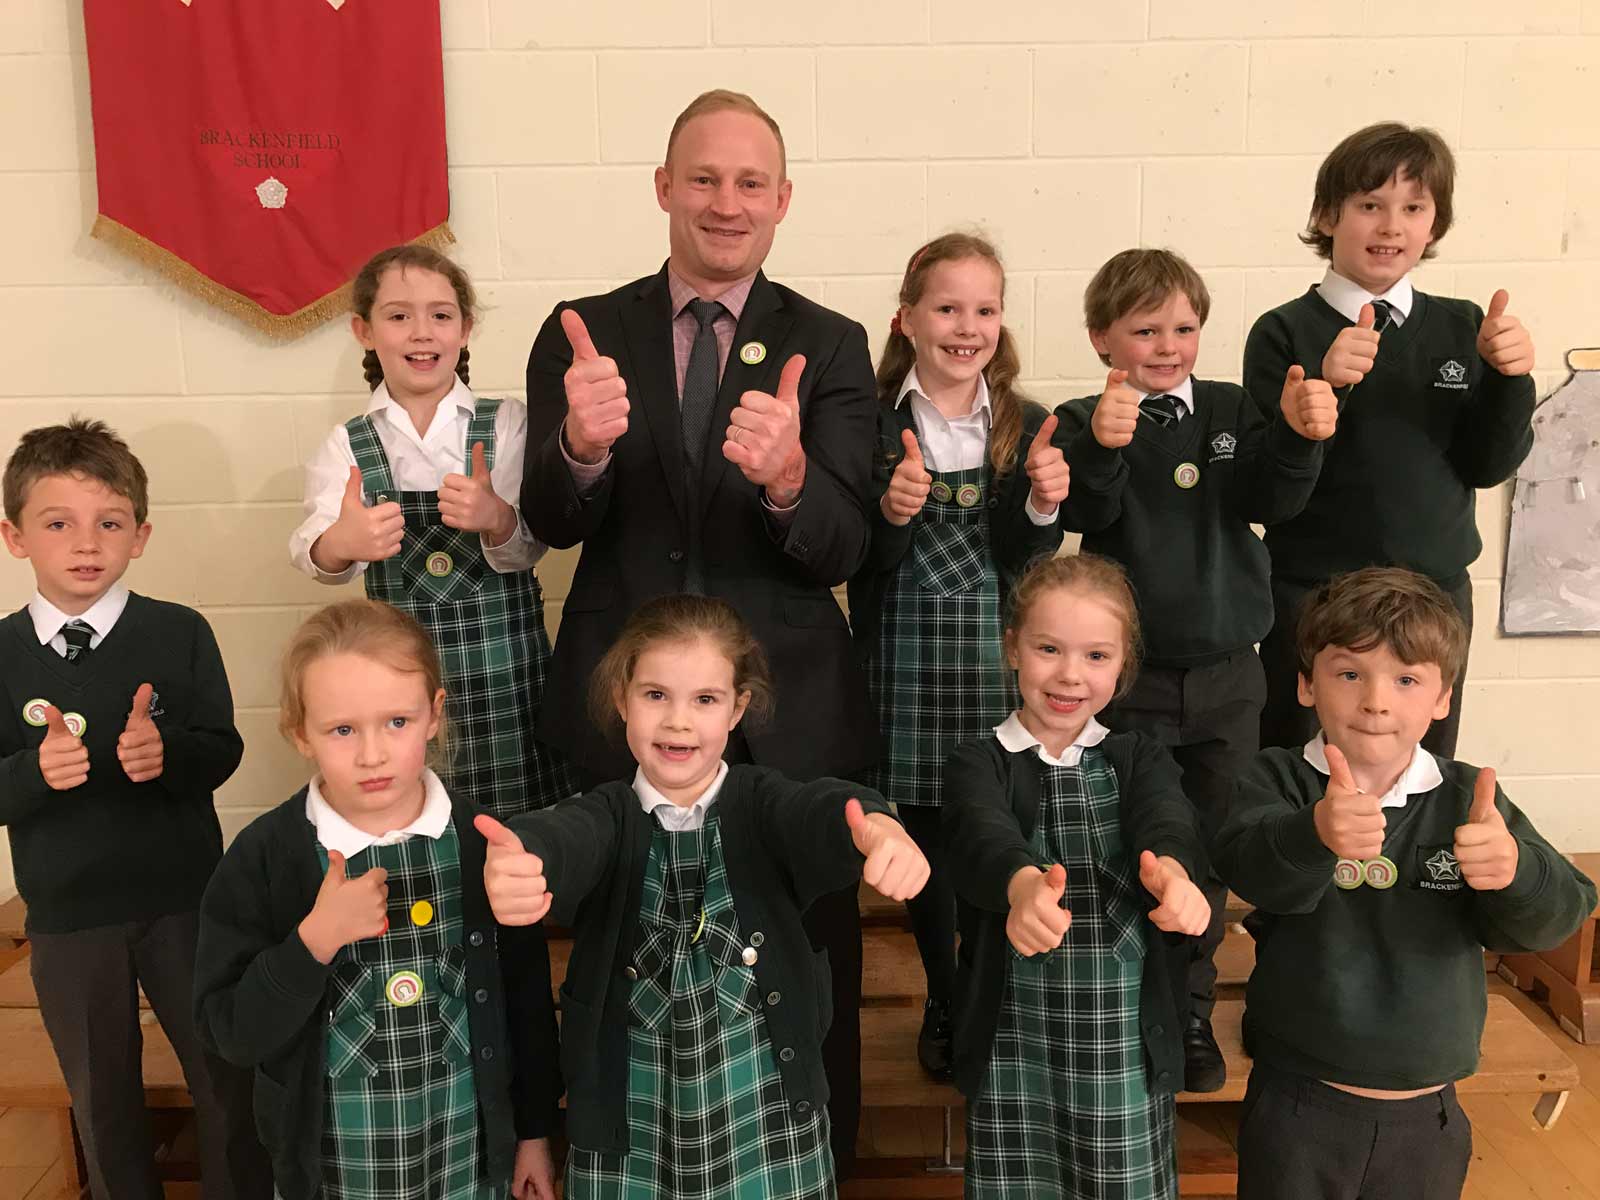 Former England Rugby League player and current Sky Sports Presenter, Jon Wells presented Brackenfield pupils on Friday (10 March 2017) with Rainbow Warrior badges